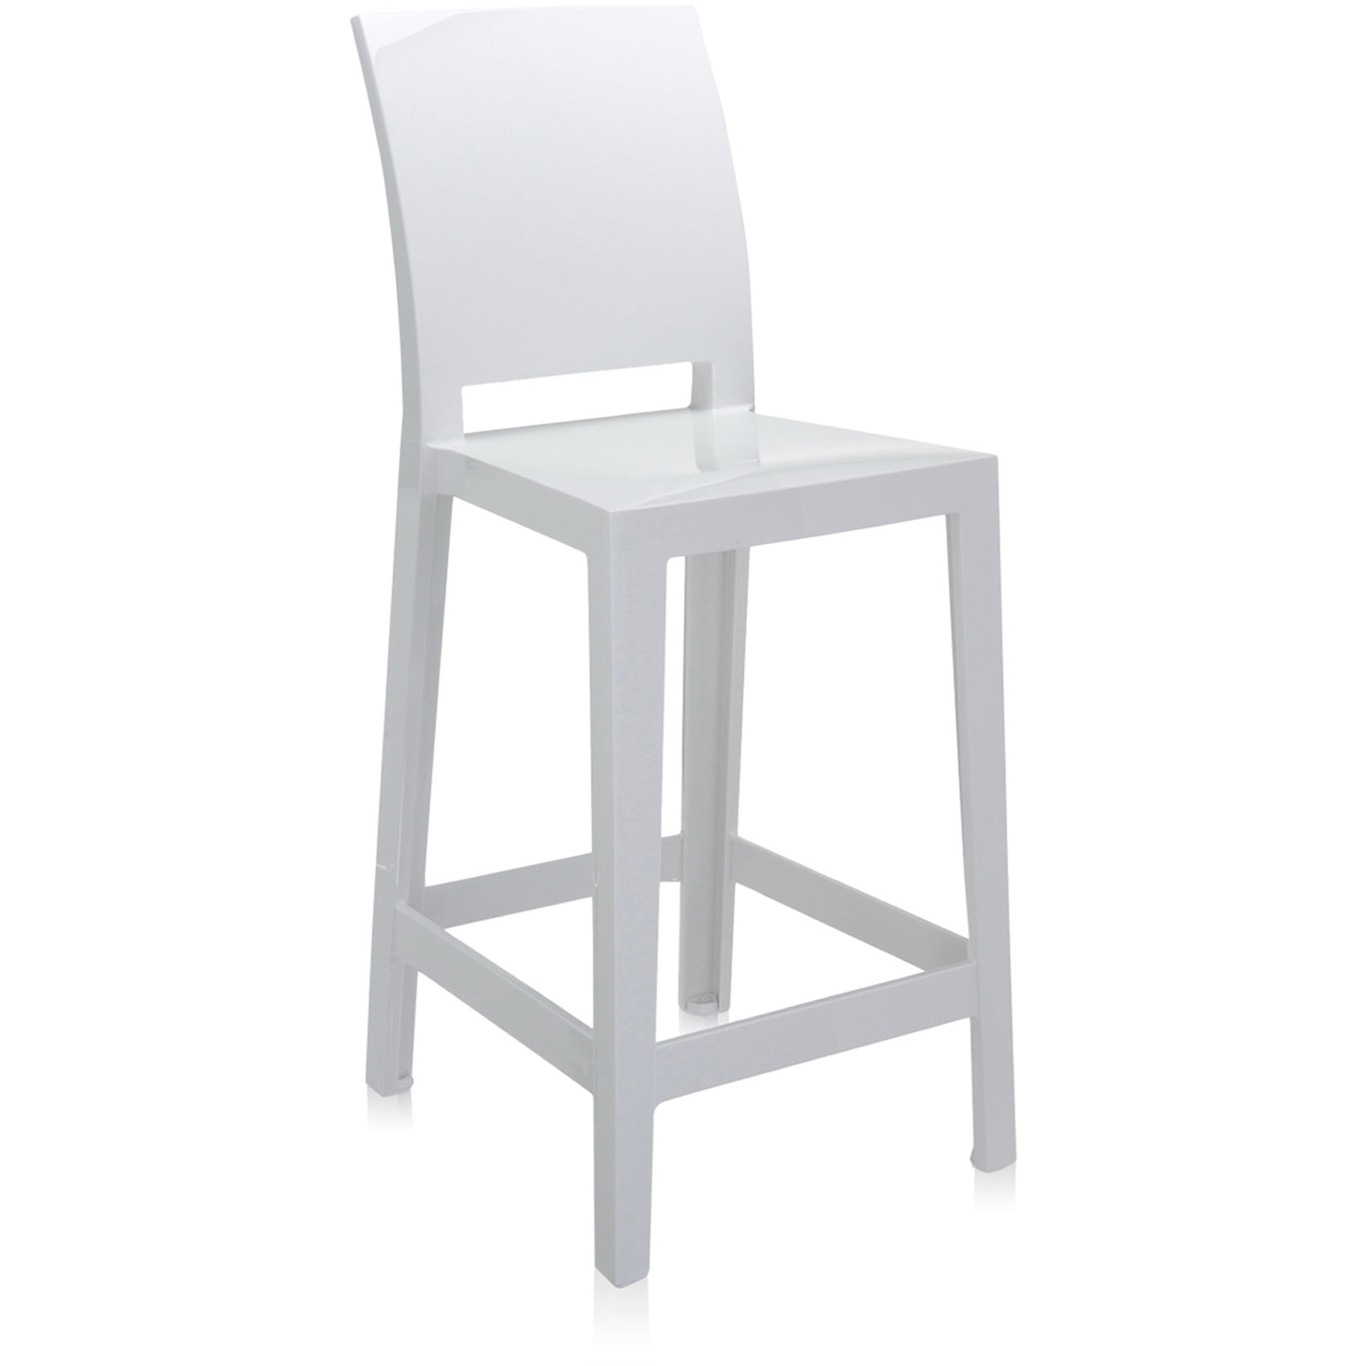 One More Please Stool, White